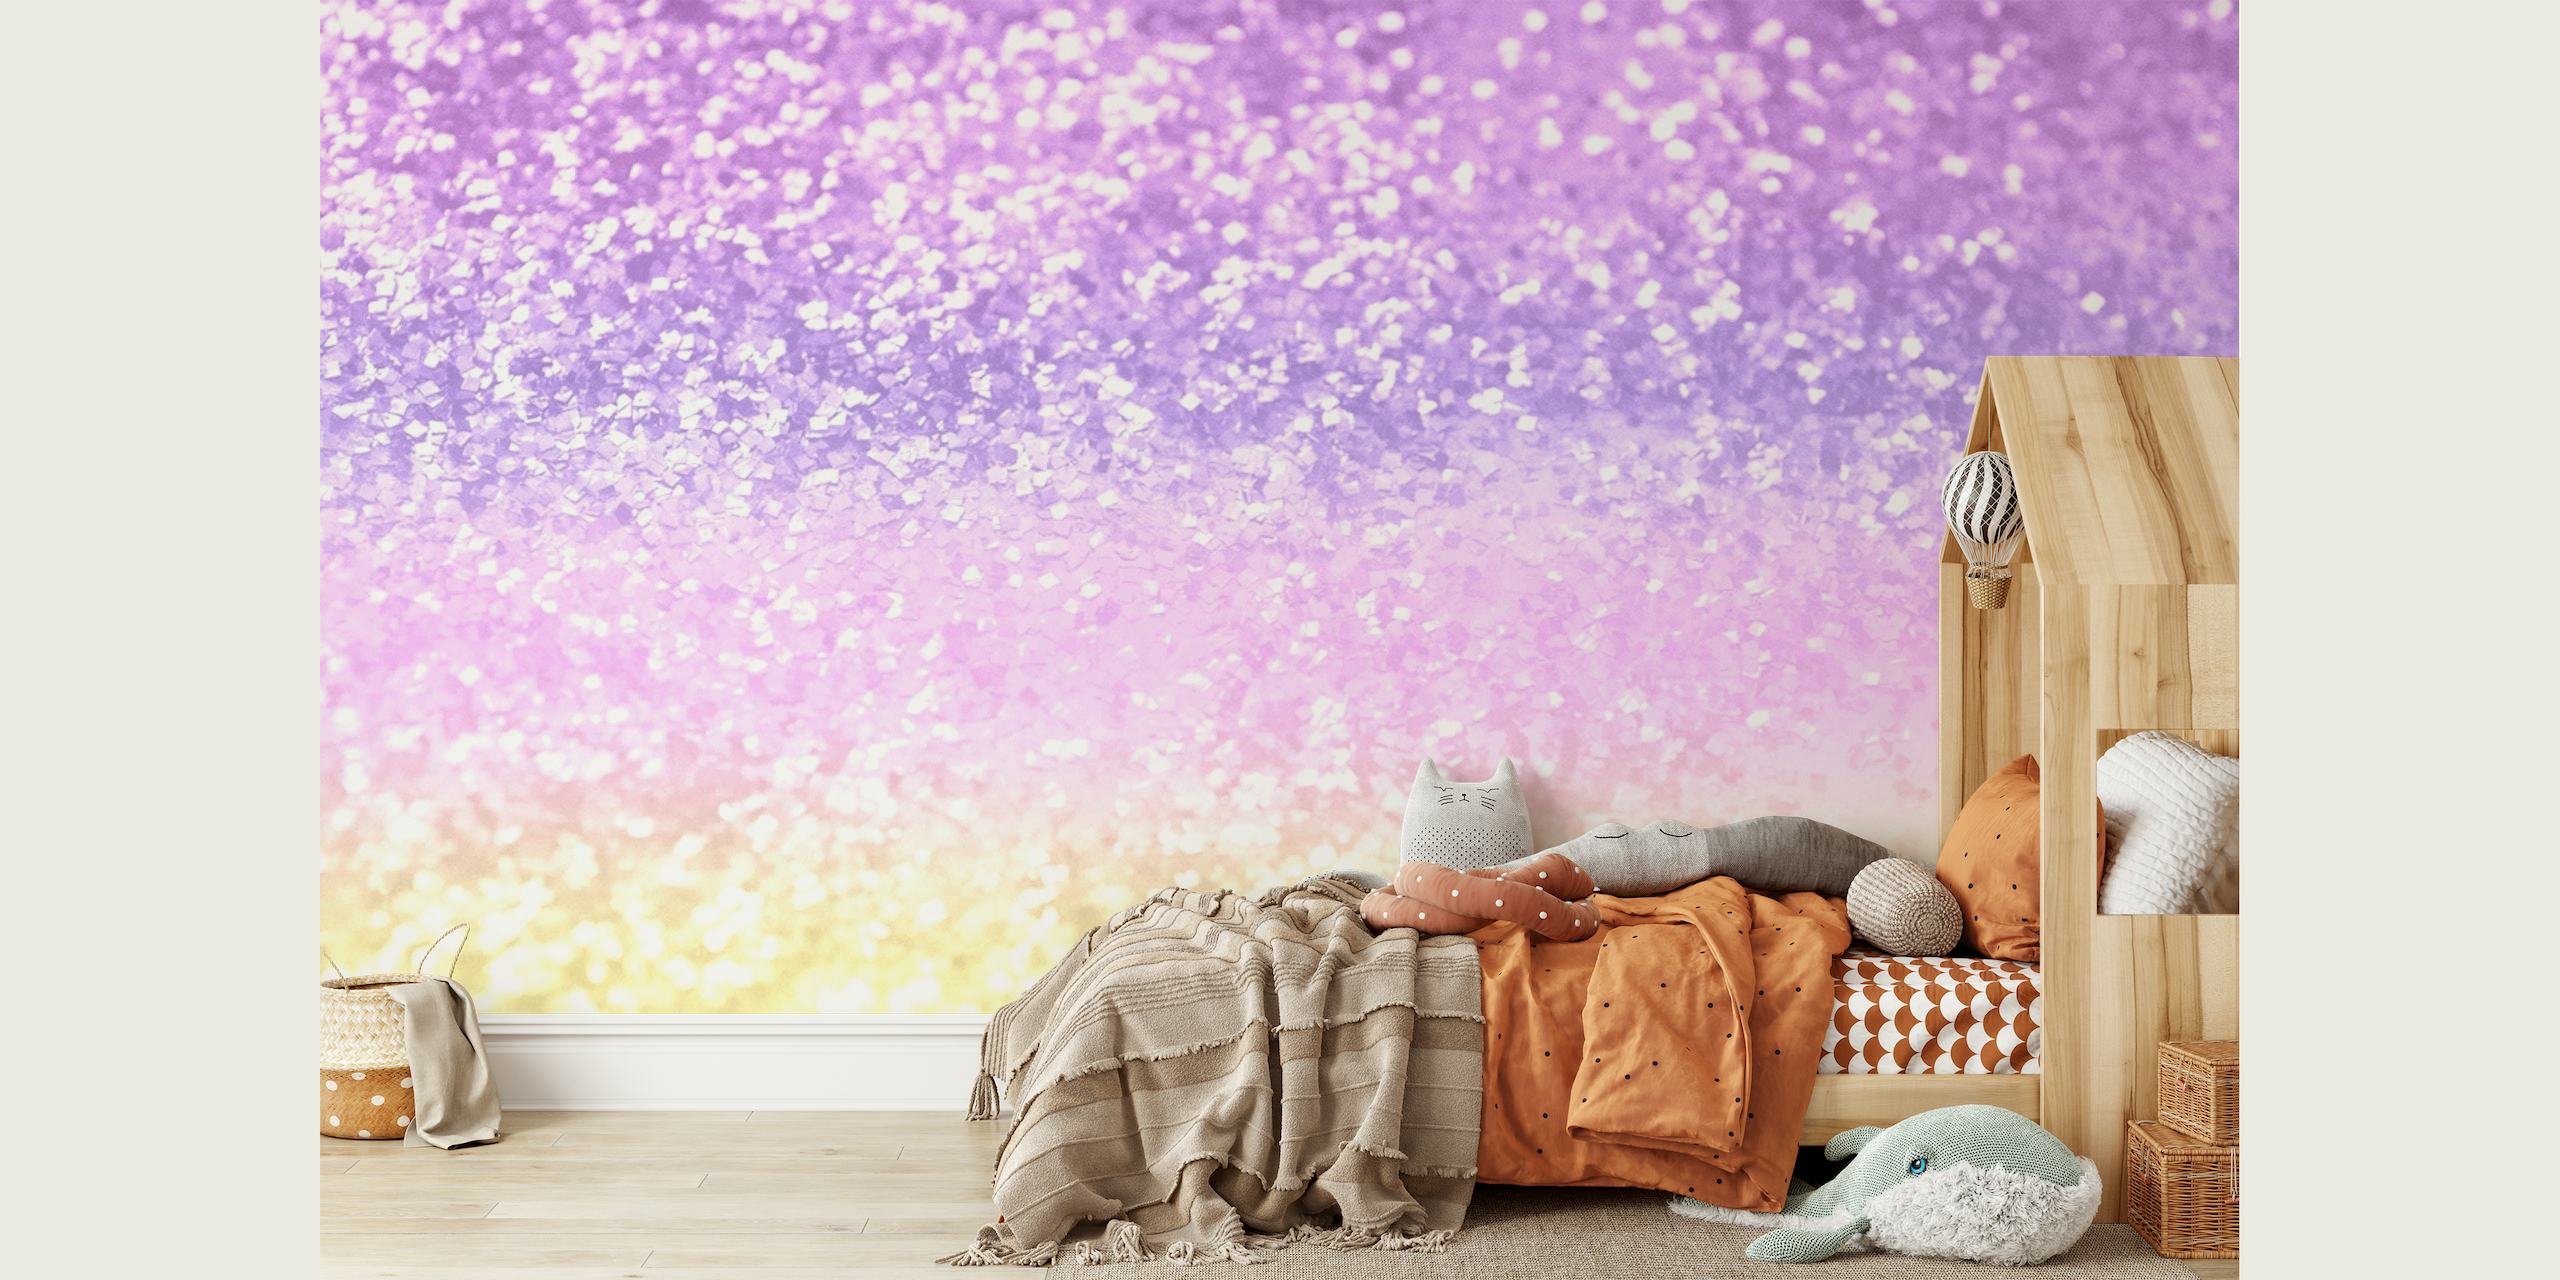 Pastel glitter wall mural with shimmery purple, pink, and yellow hues perfect for children's rooms.